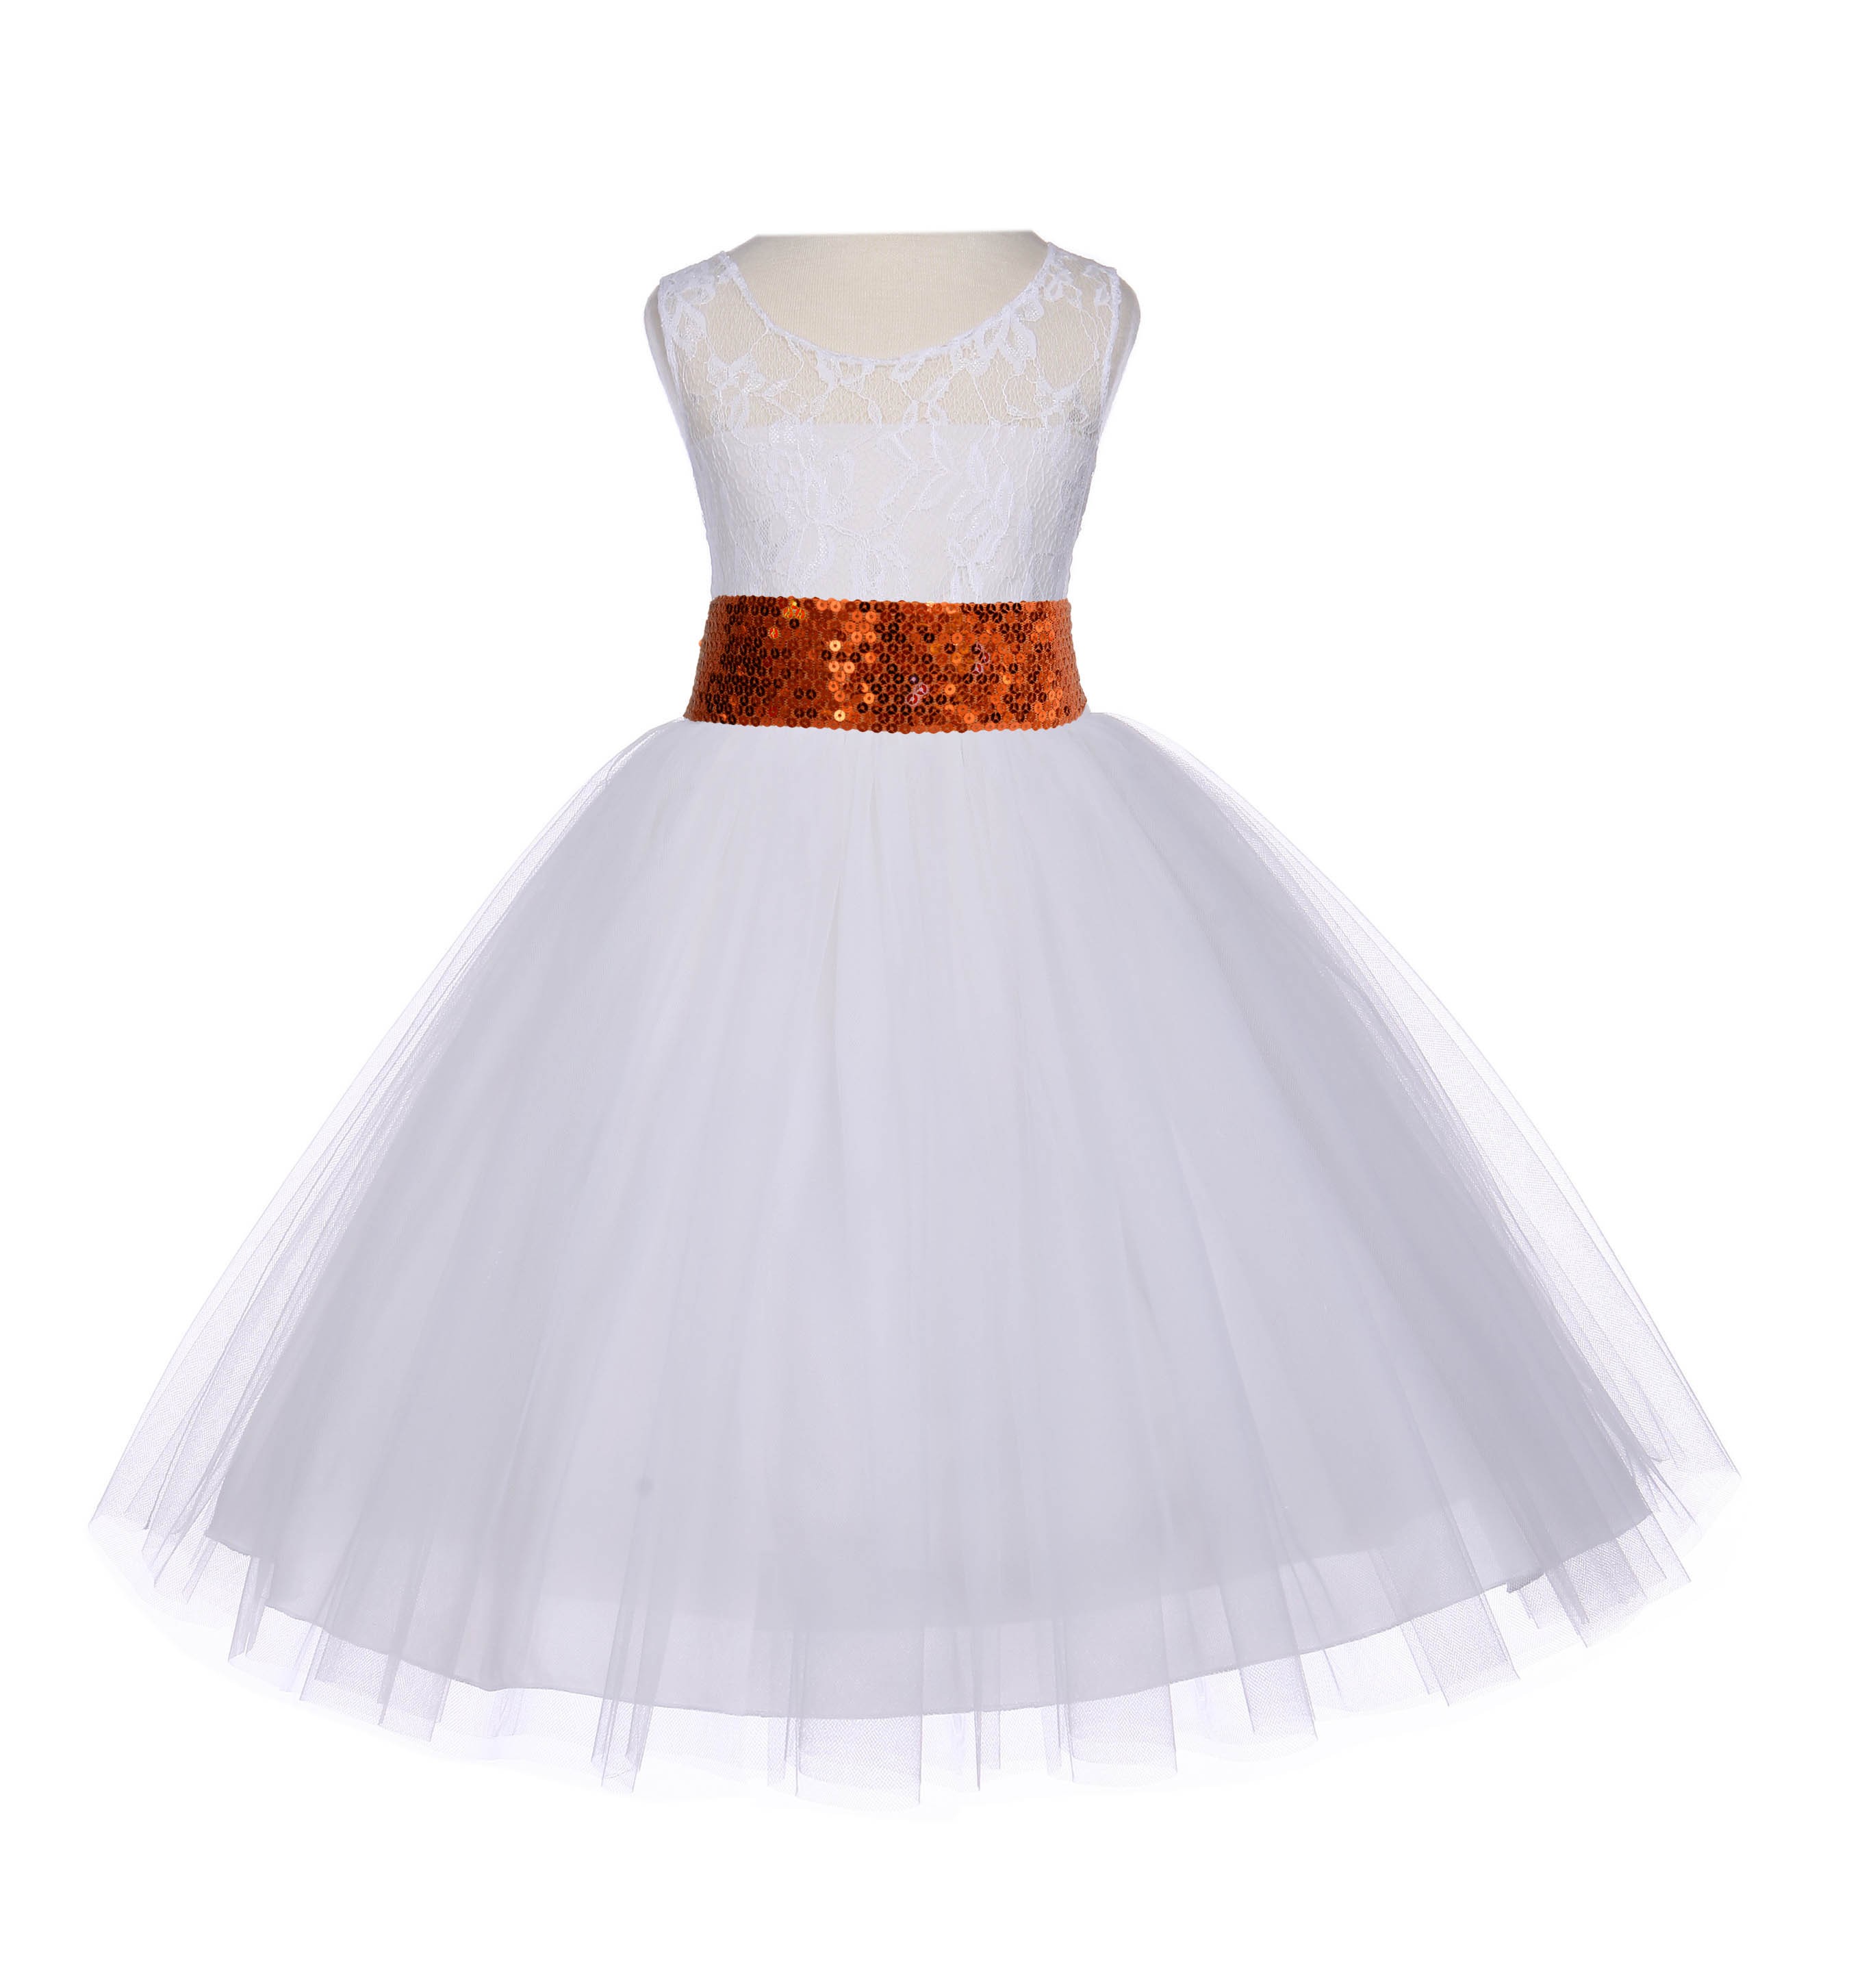 Ivory Floral Lace Bodice Tulle Orange Sequin Flower Girl Dress 153mh